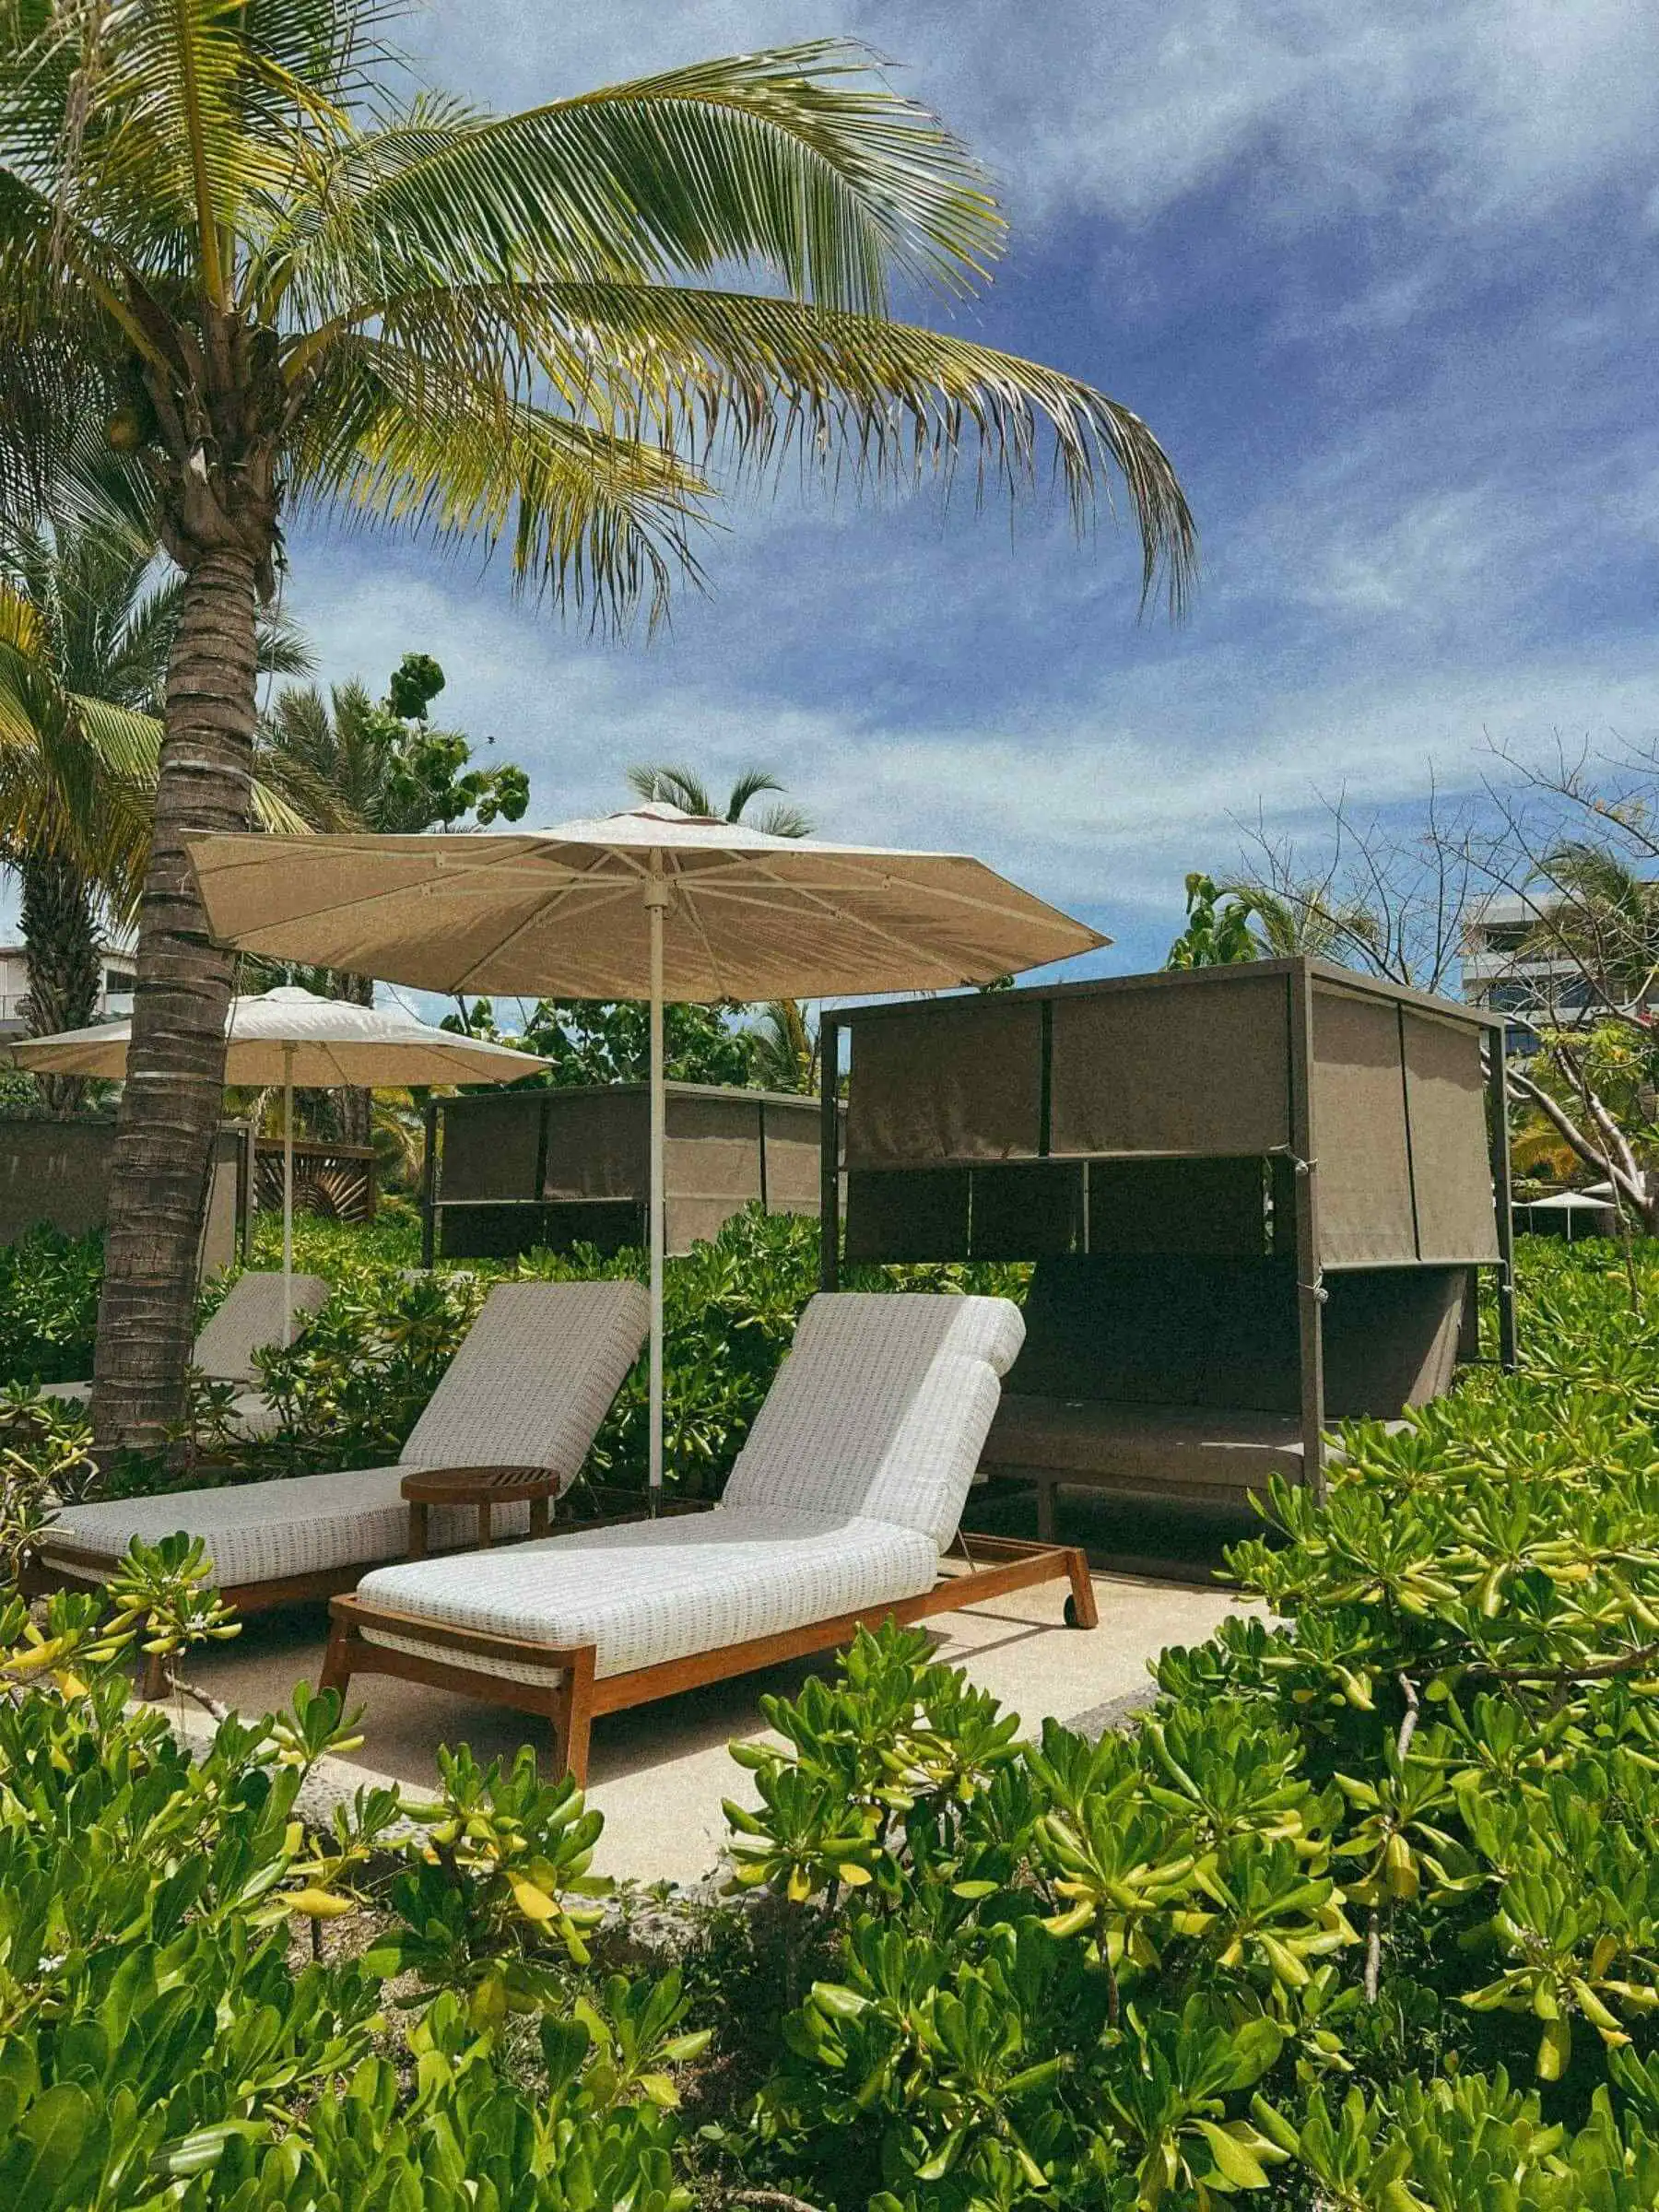 Private cabana with loungers